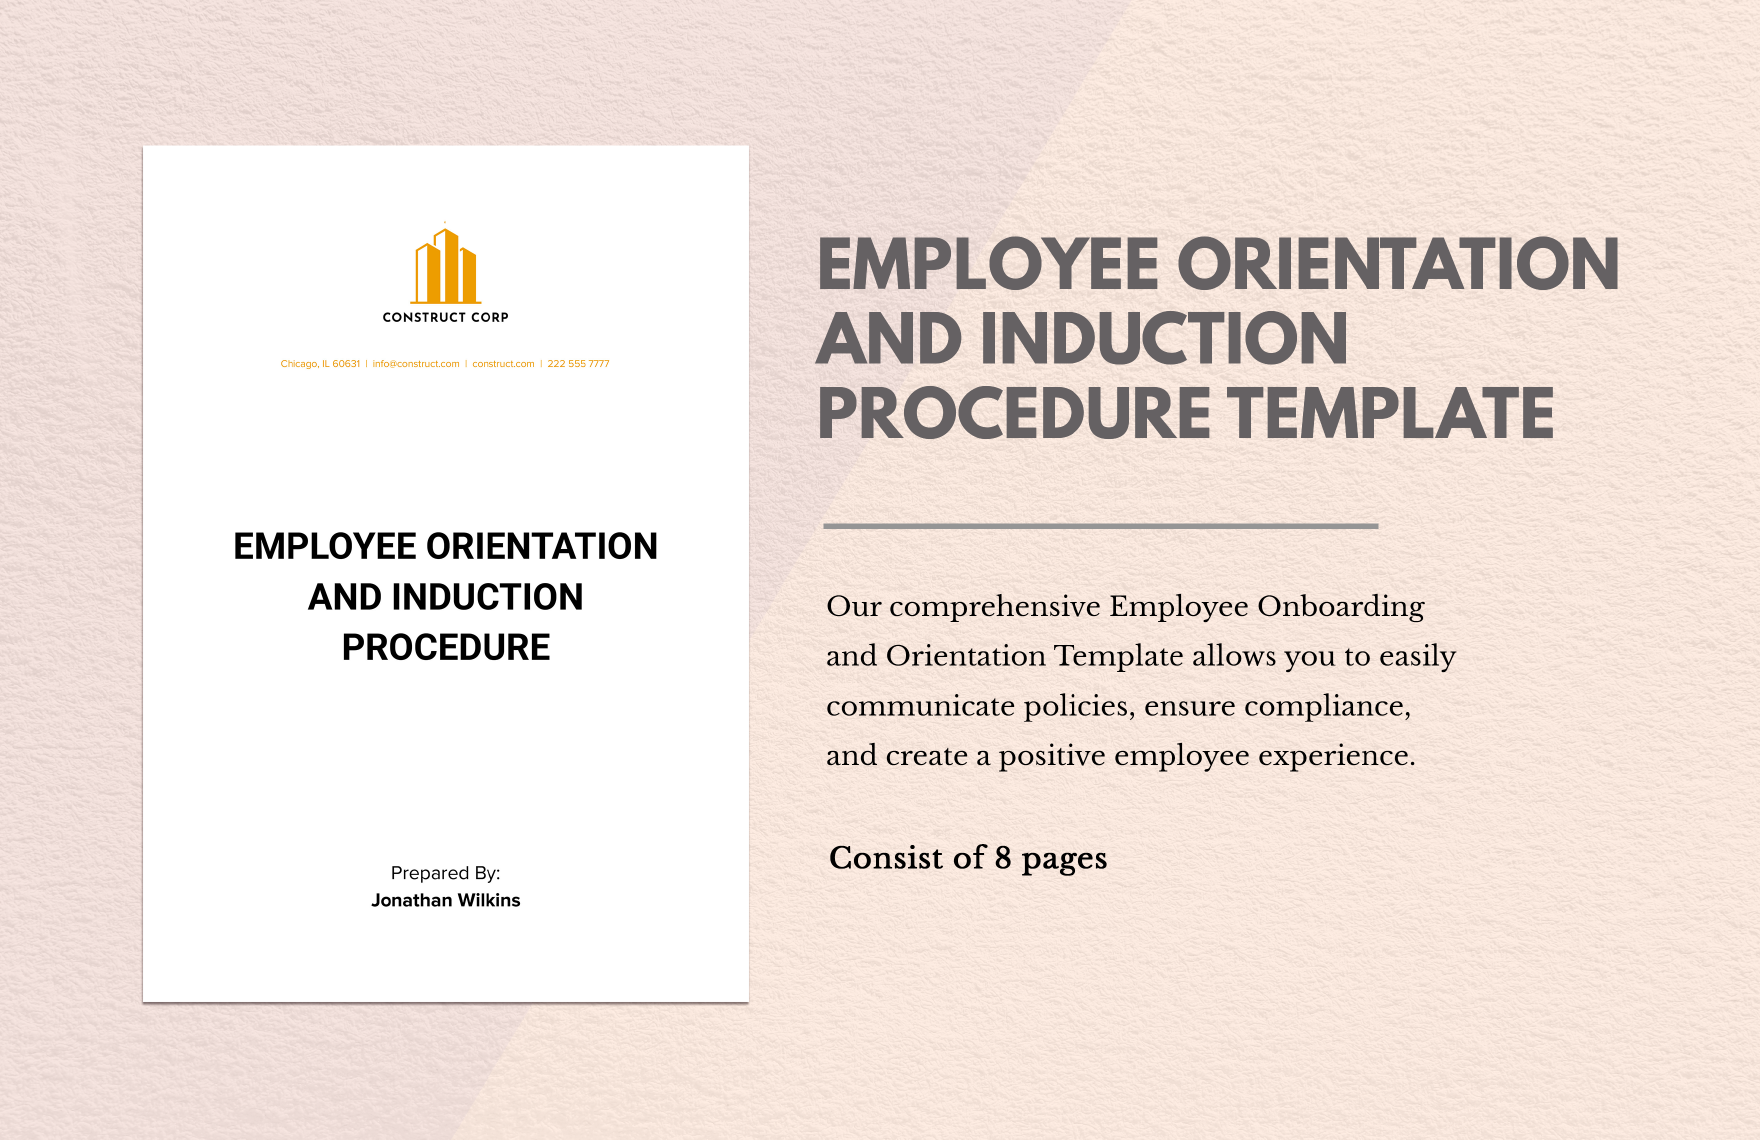 Employee Orientation and Induction Procedure